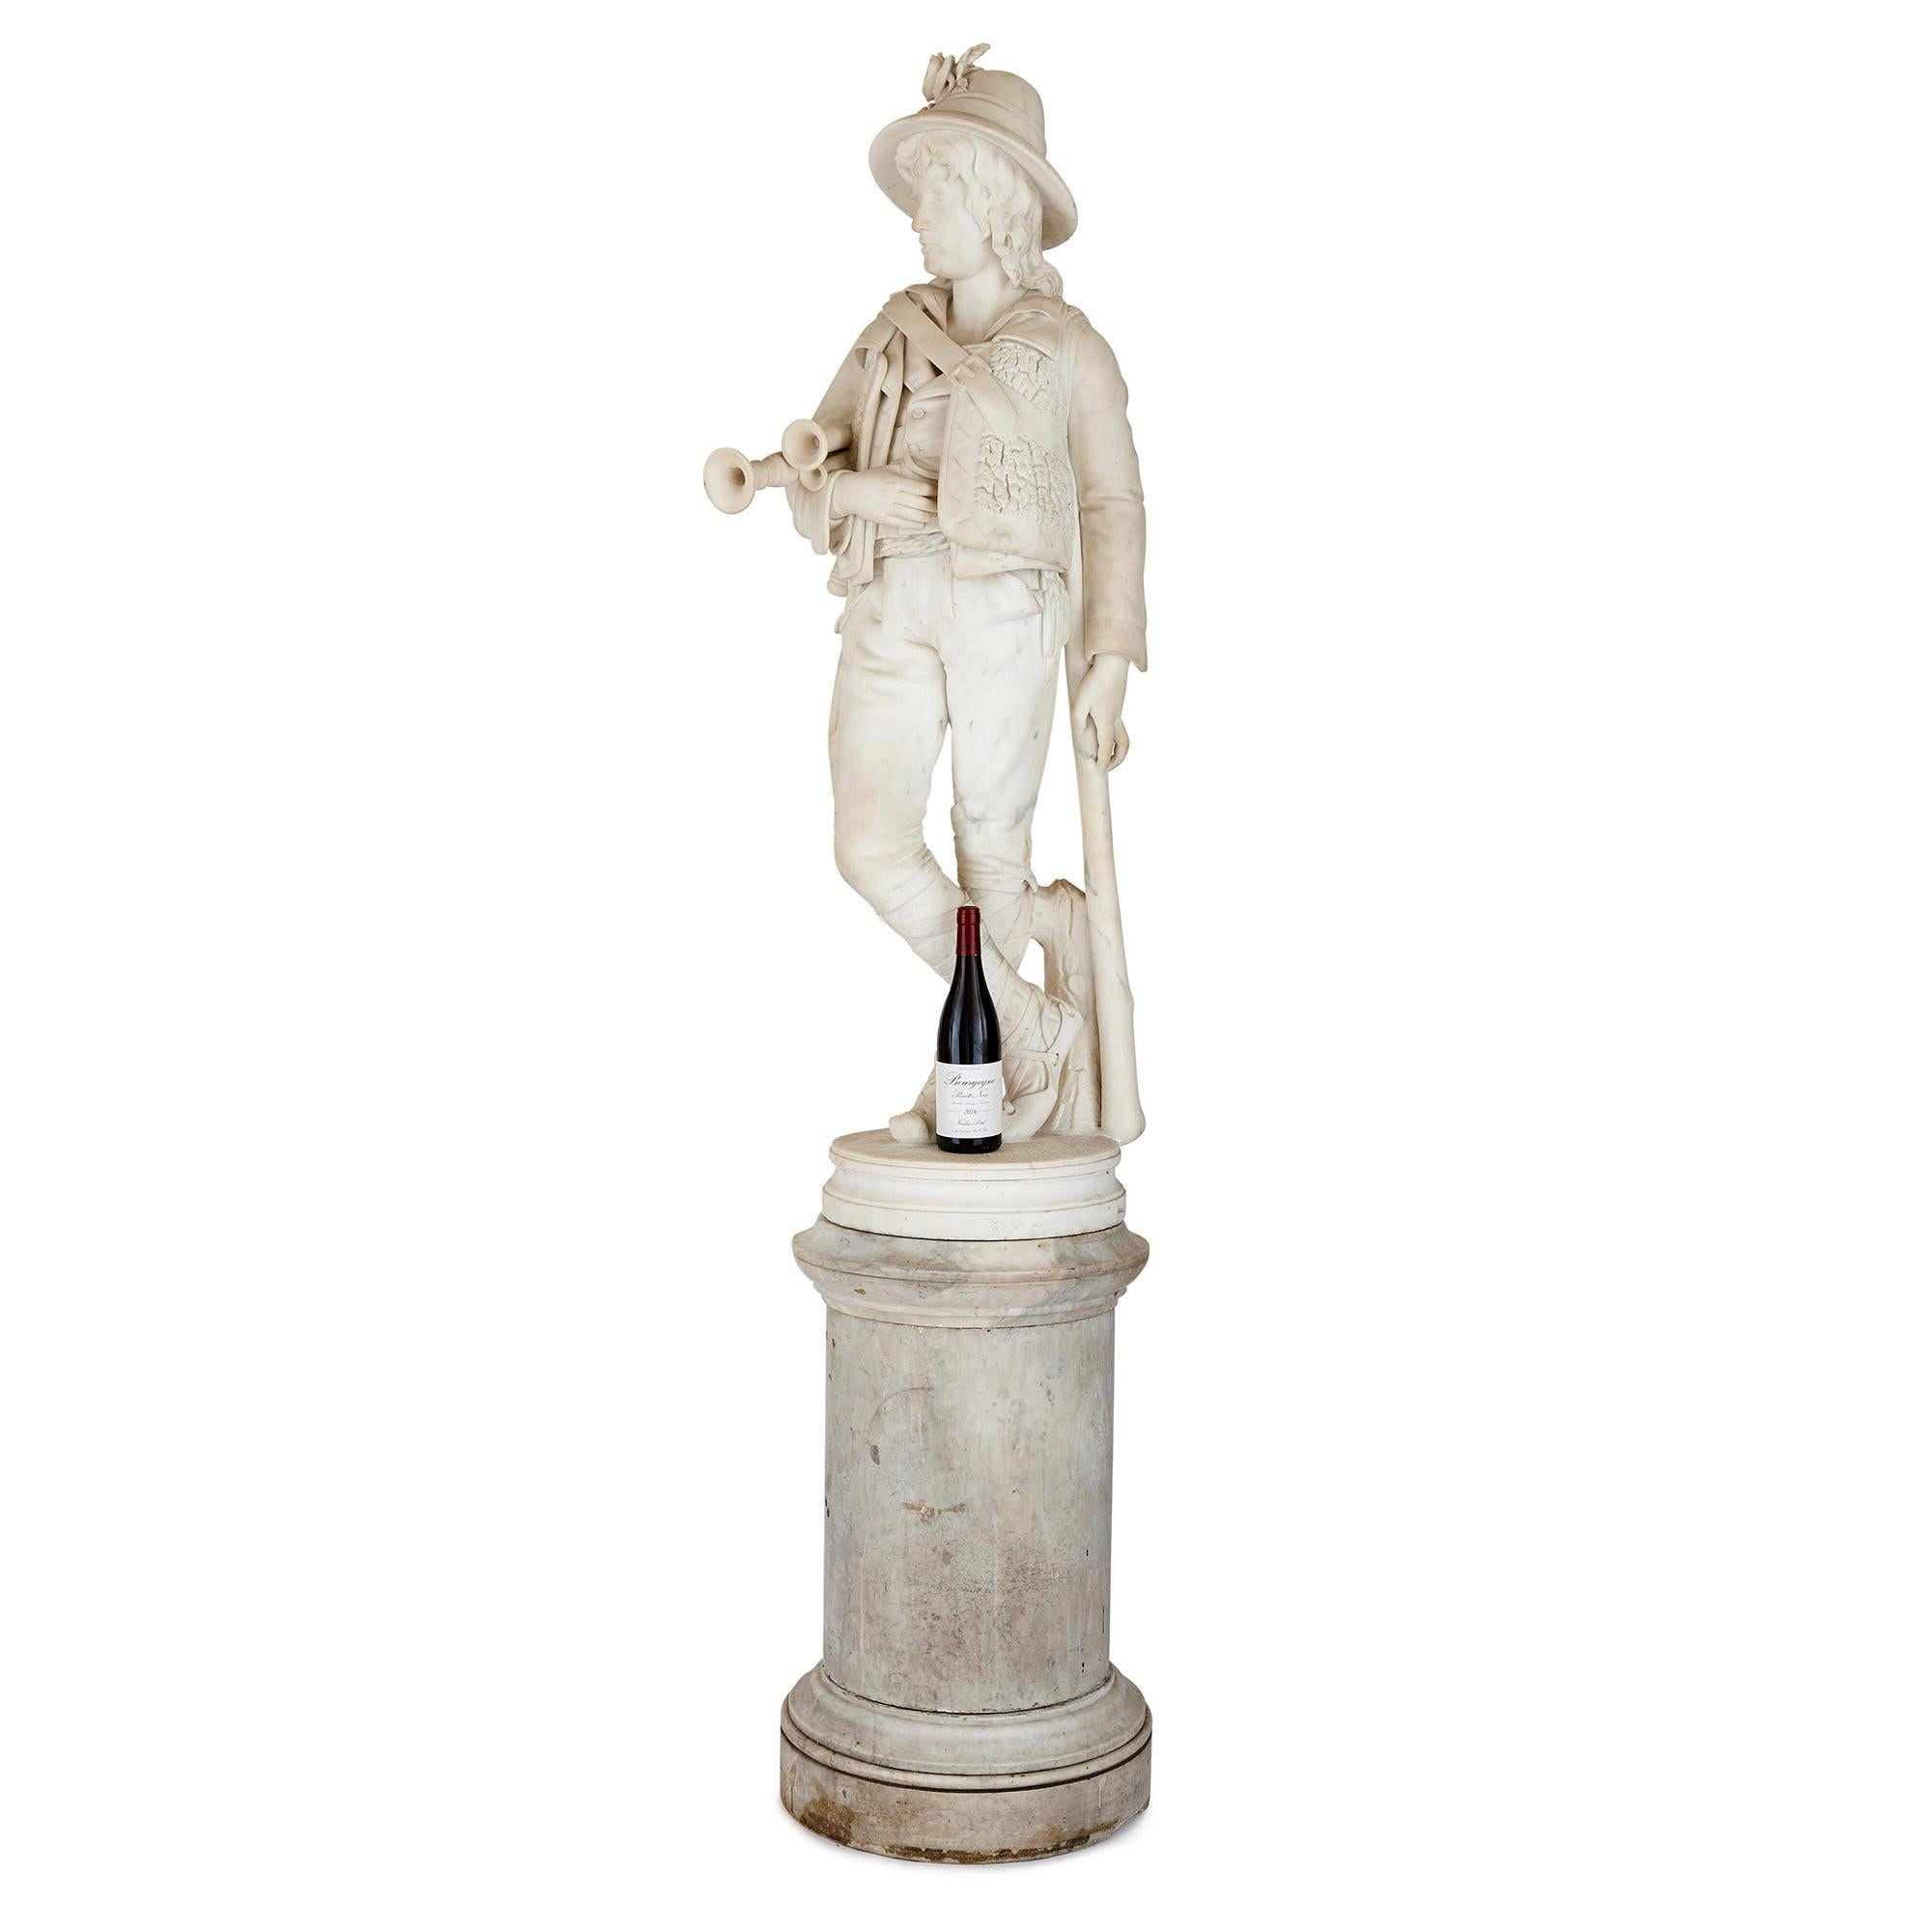 Full-Size Marble Figure by Belgian Sculptor Louis Samain For Sale at 1stDibs